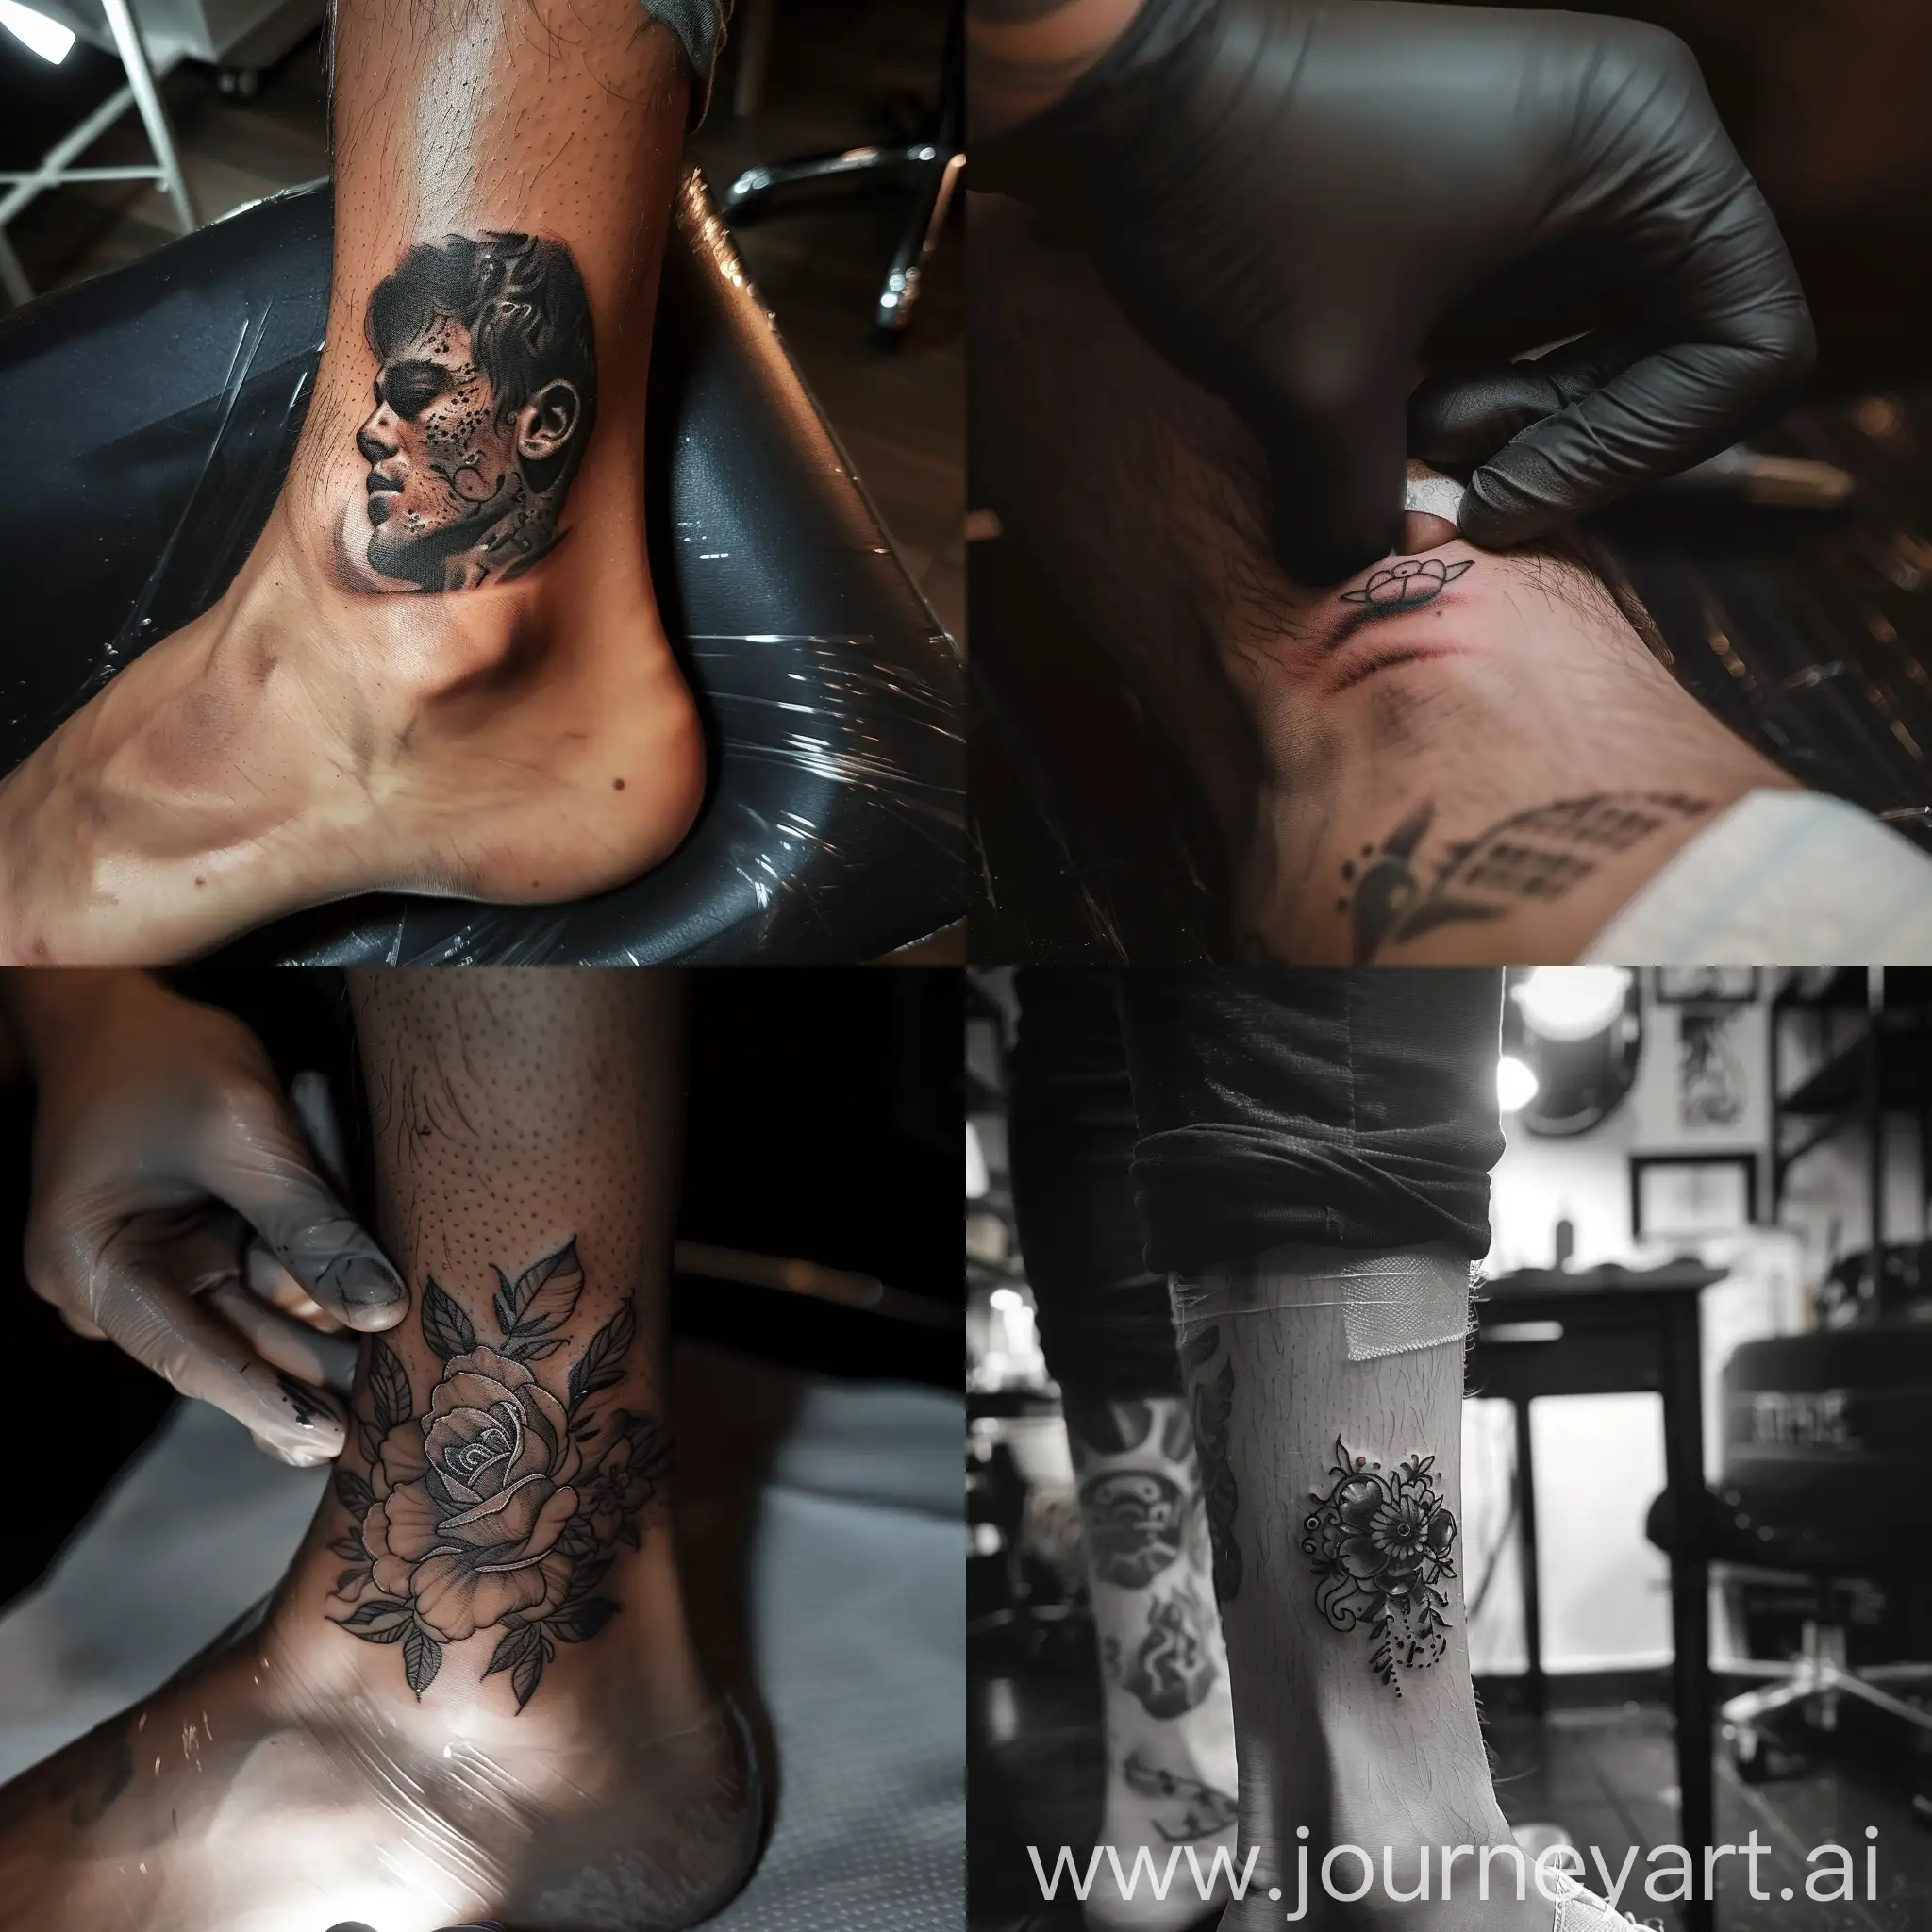 Close-up of tattooing on young man's ankle - image with cinema lighting